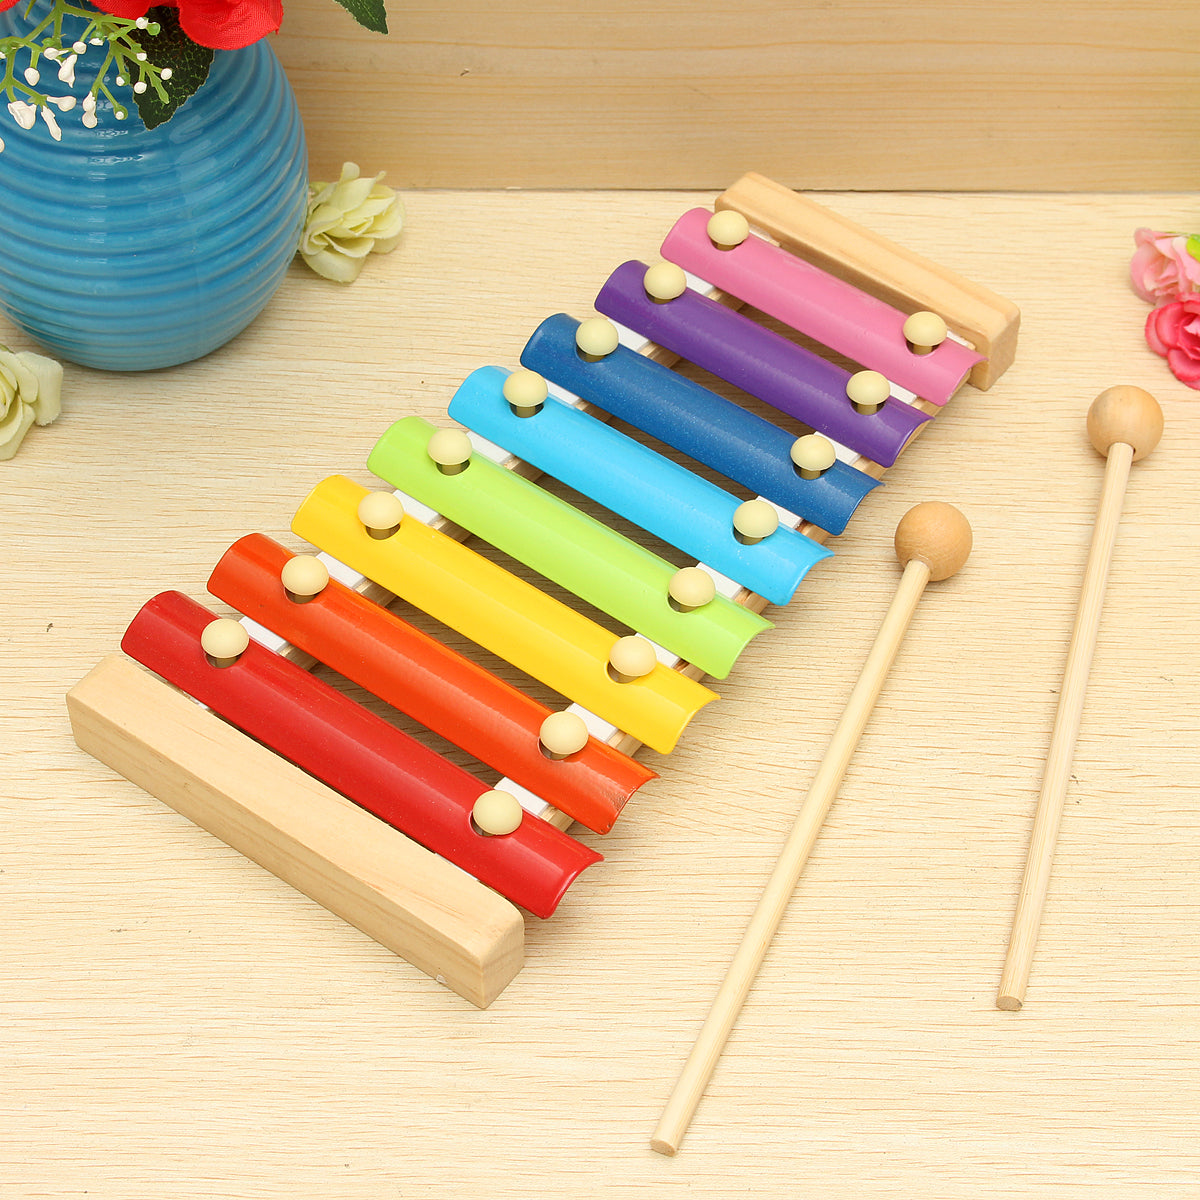 Kids Toys 8 Notes Musical Xylophone Piano Wooden Instrument For Children